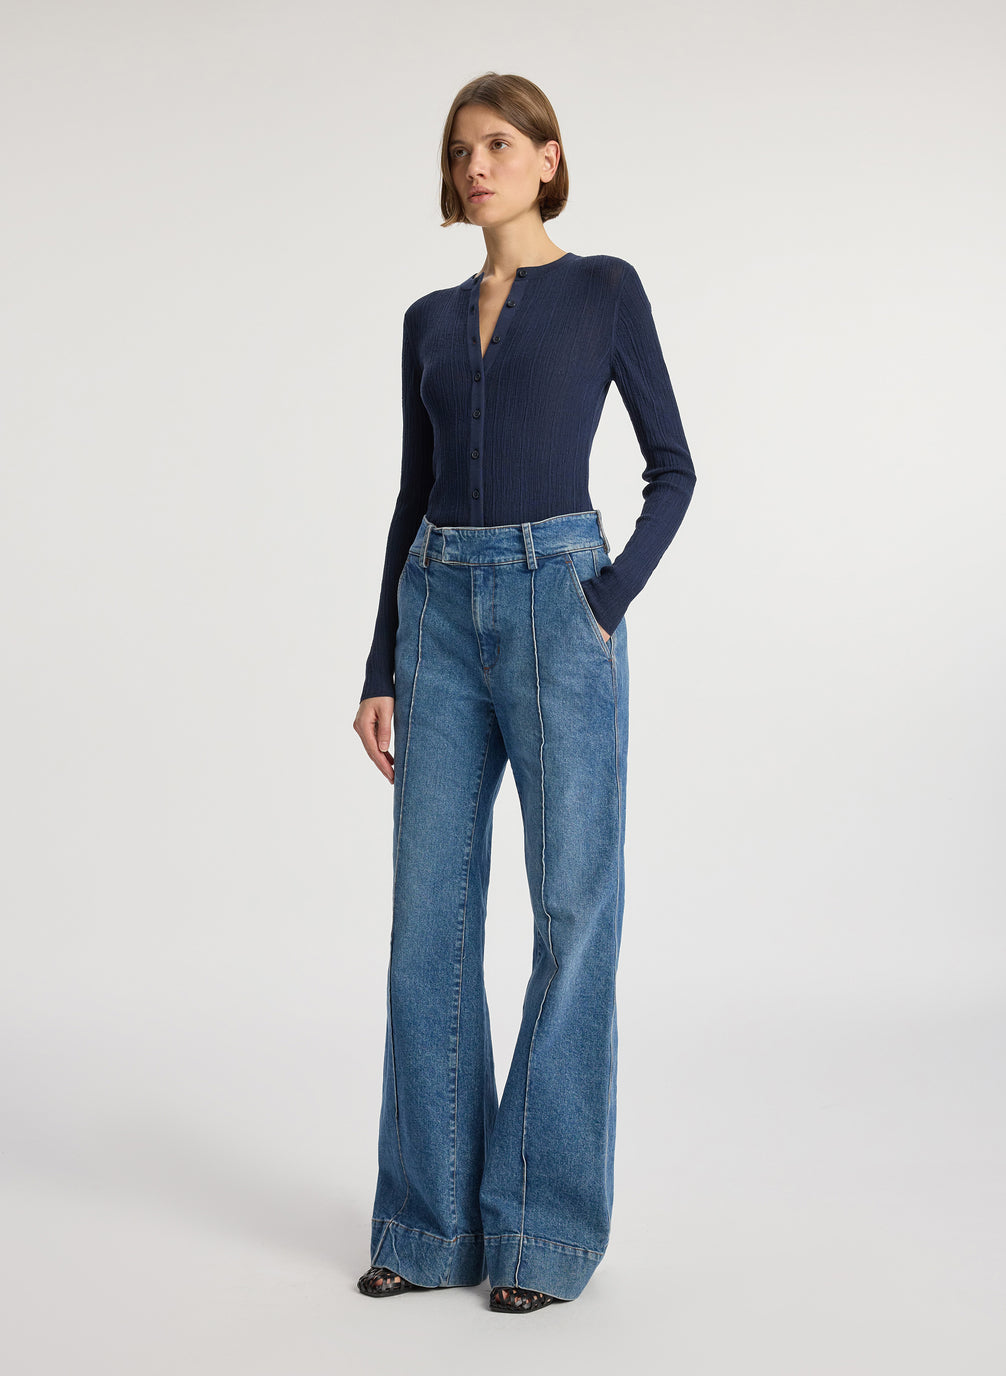 side view of woman wearing navy blue cardigan and medium blue wash wide leg denim jeans